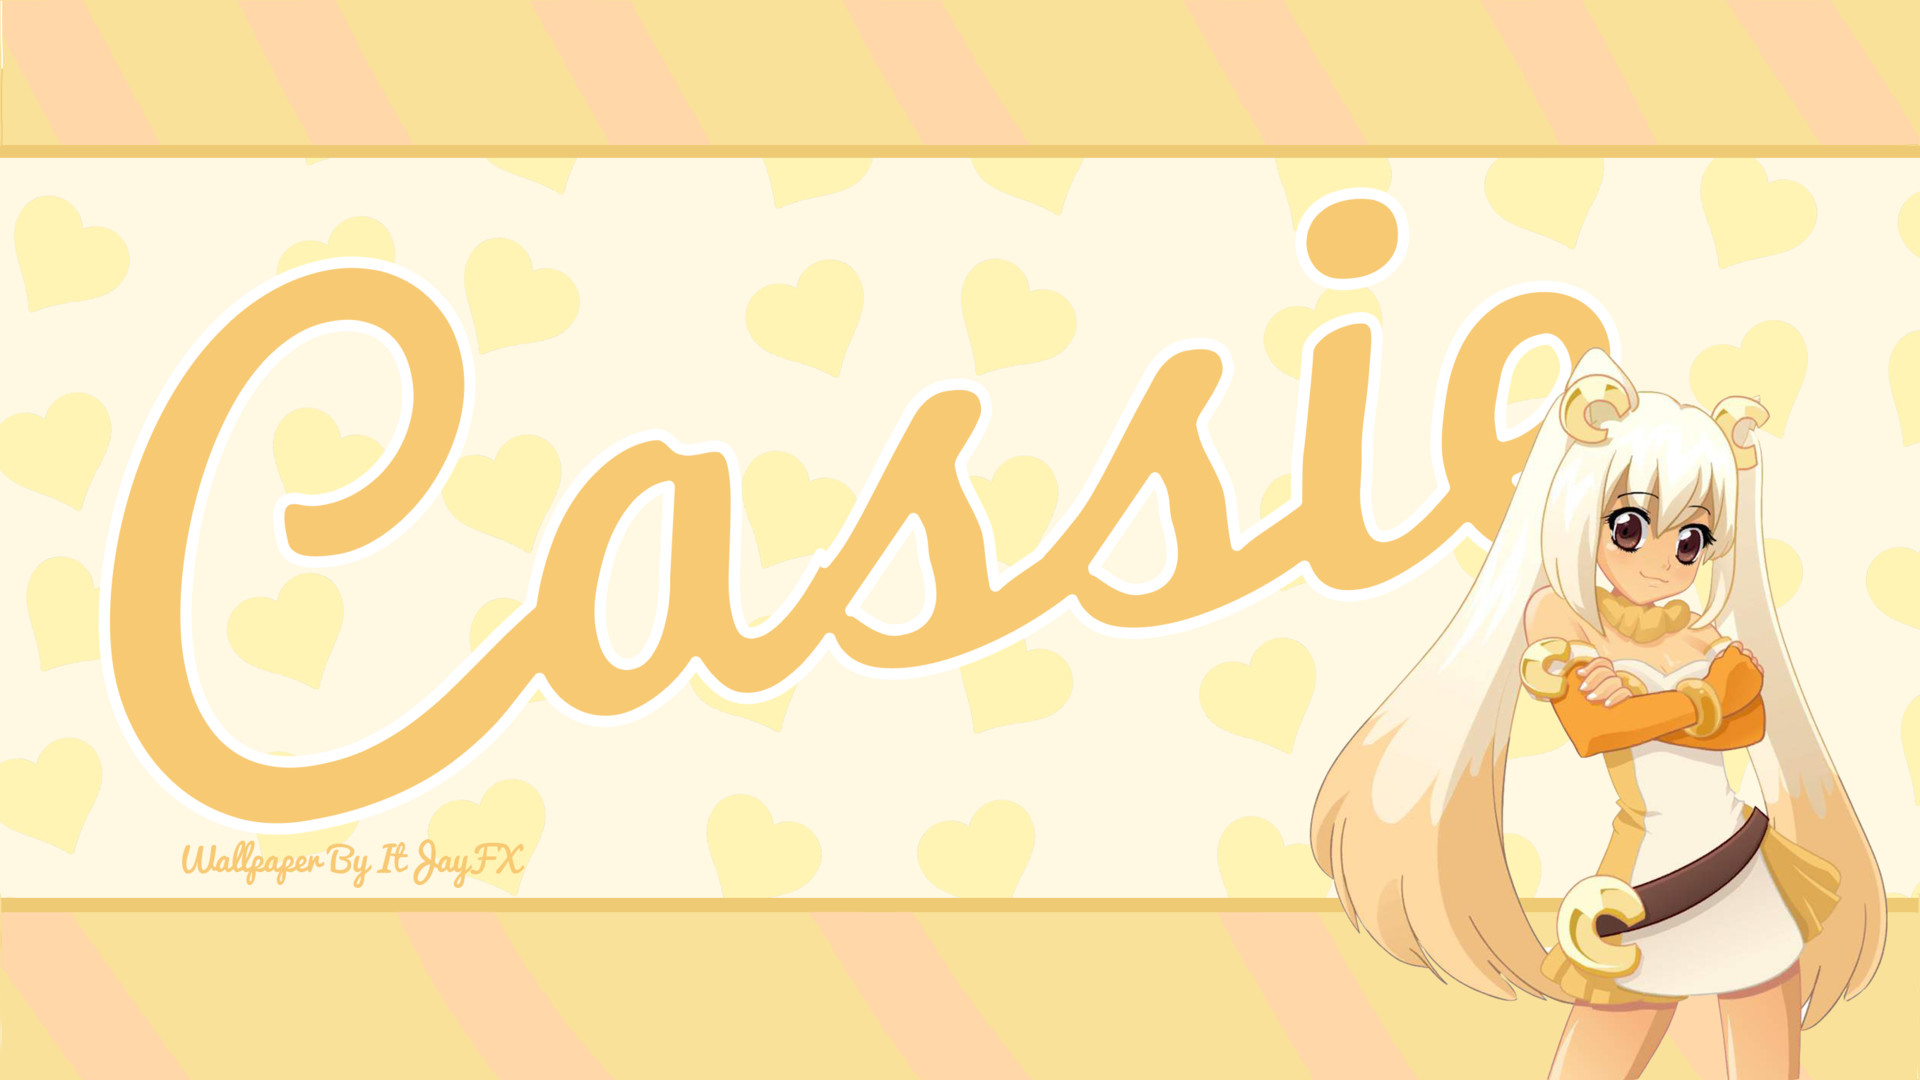 1920x1080 I Made A Cassie Wallpaper For Your Desktop Background.